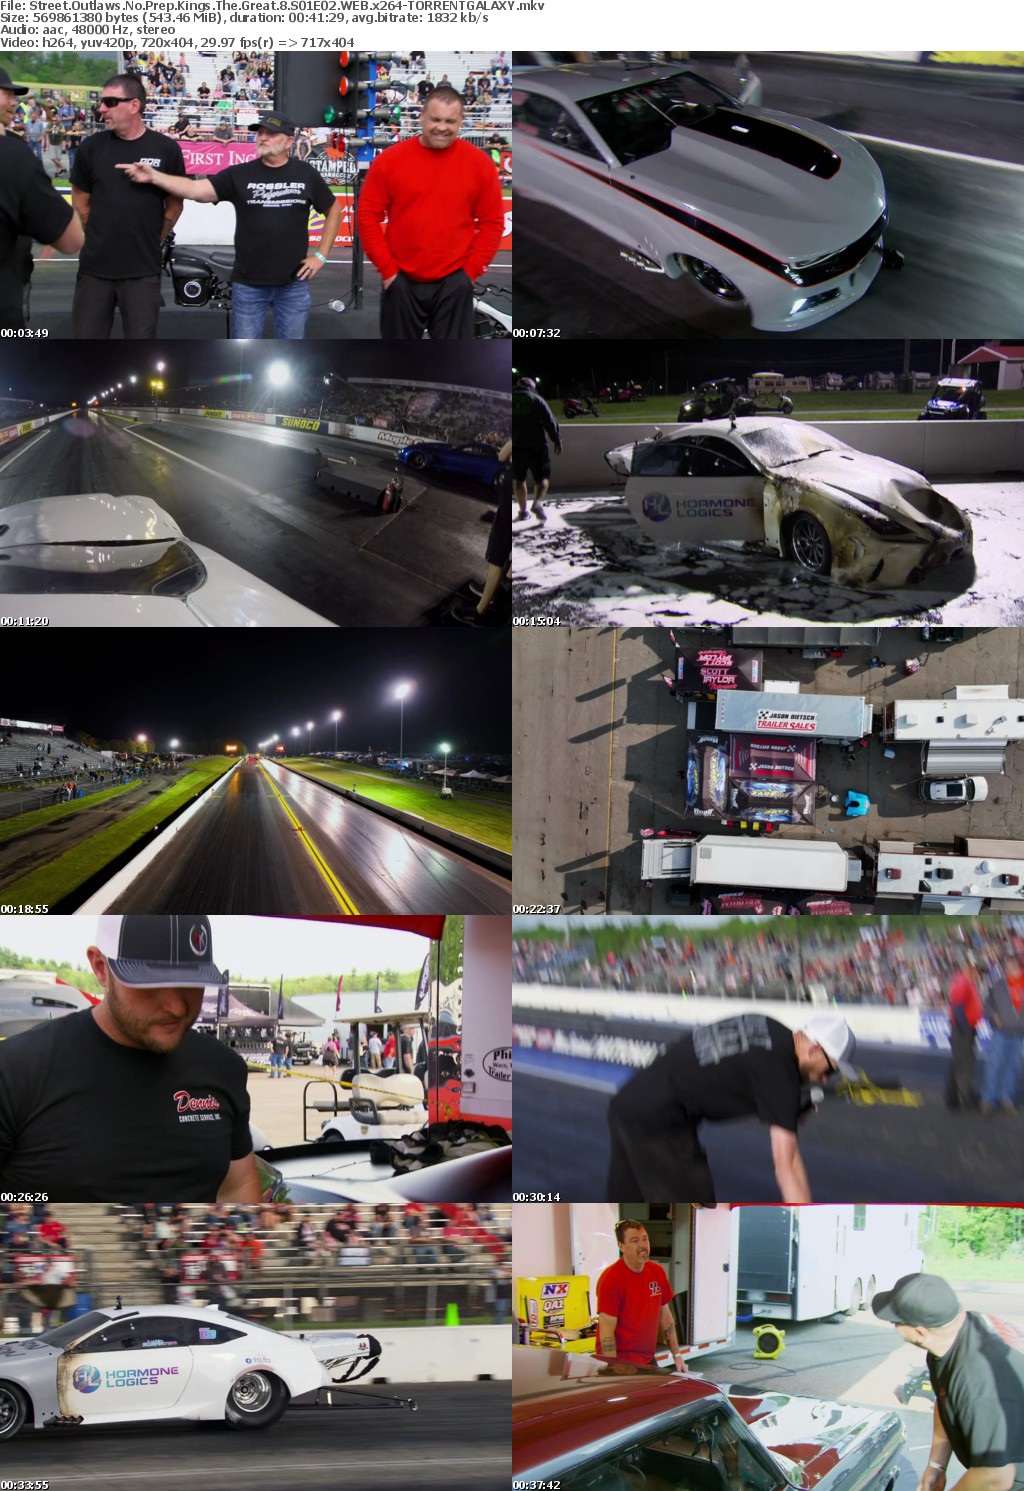 Street Outlaws No Prep Kings The Great 8 S01E02 WEB x264-GALAXY